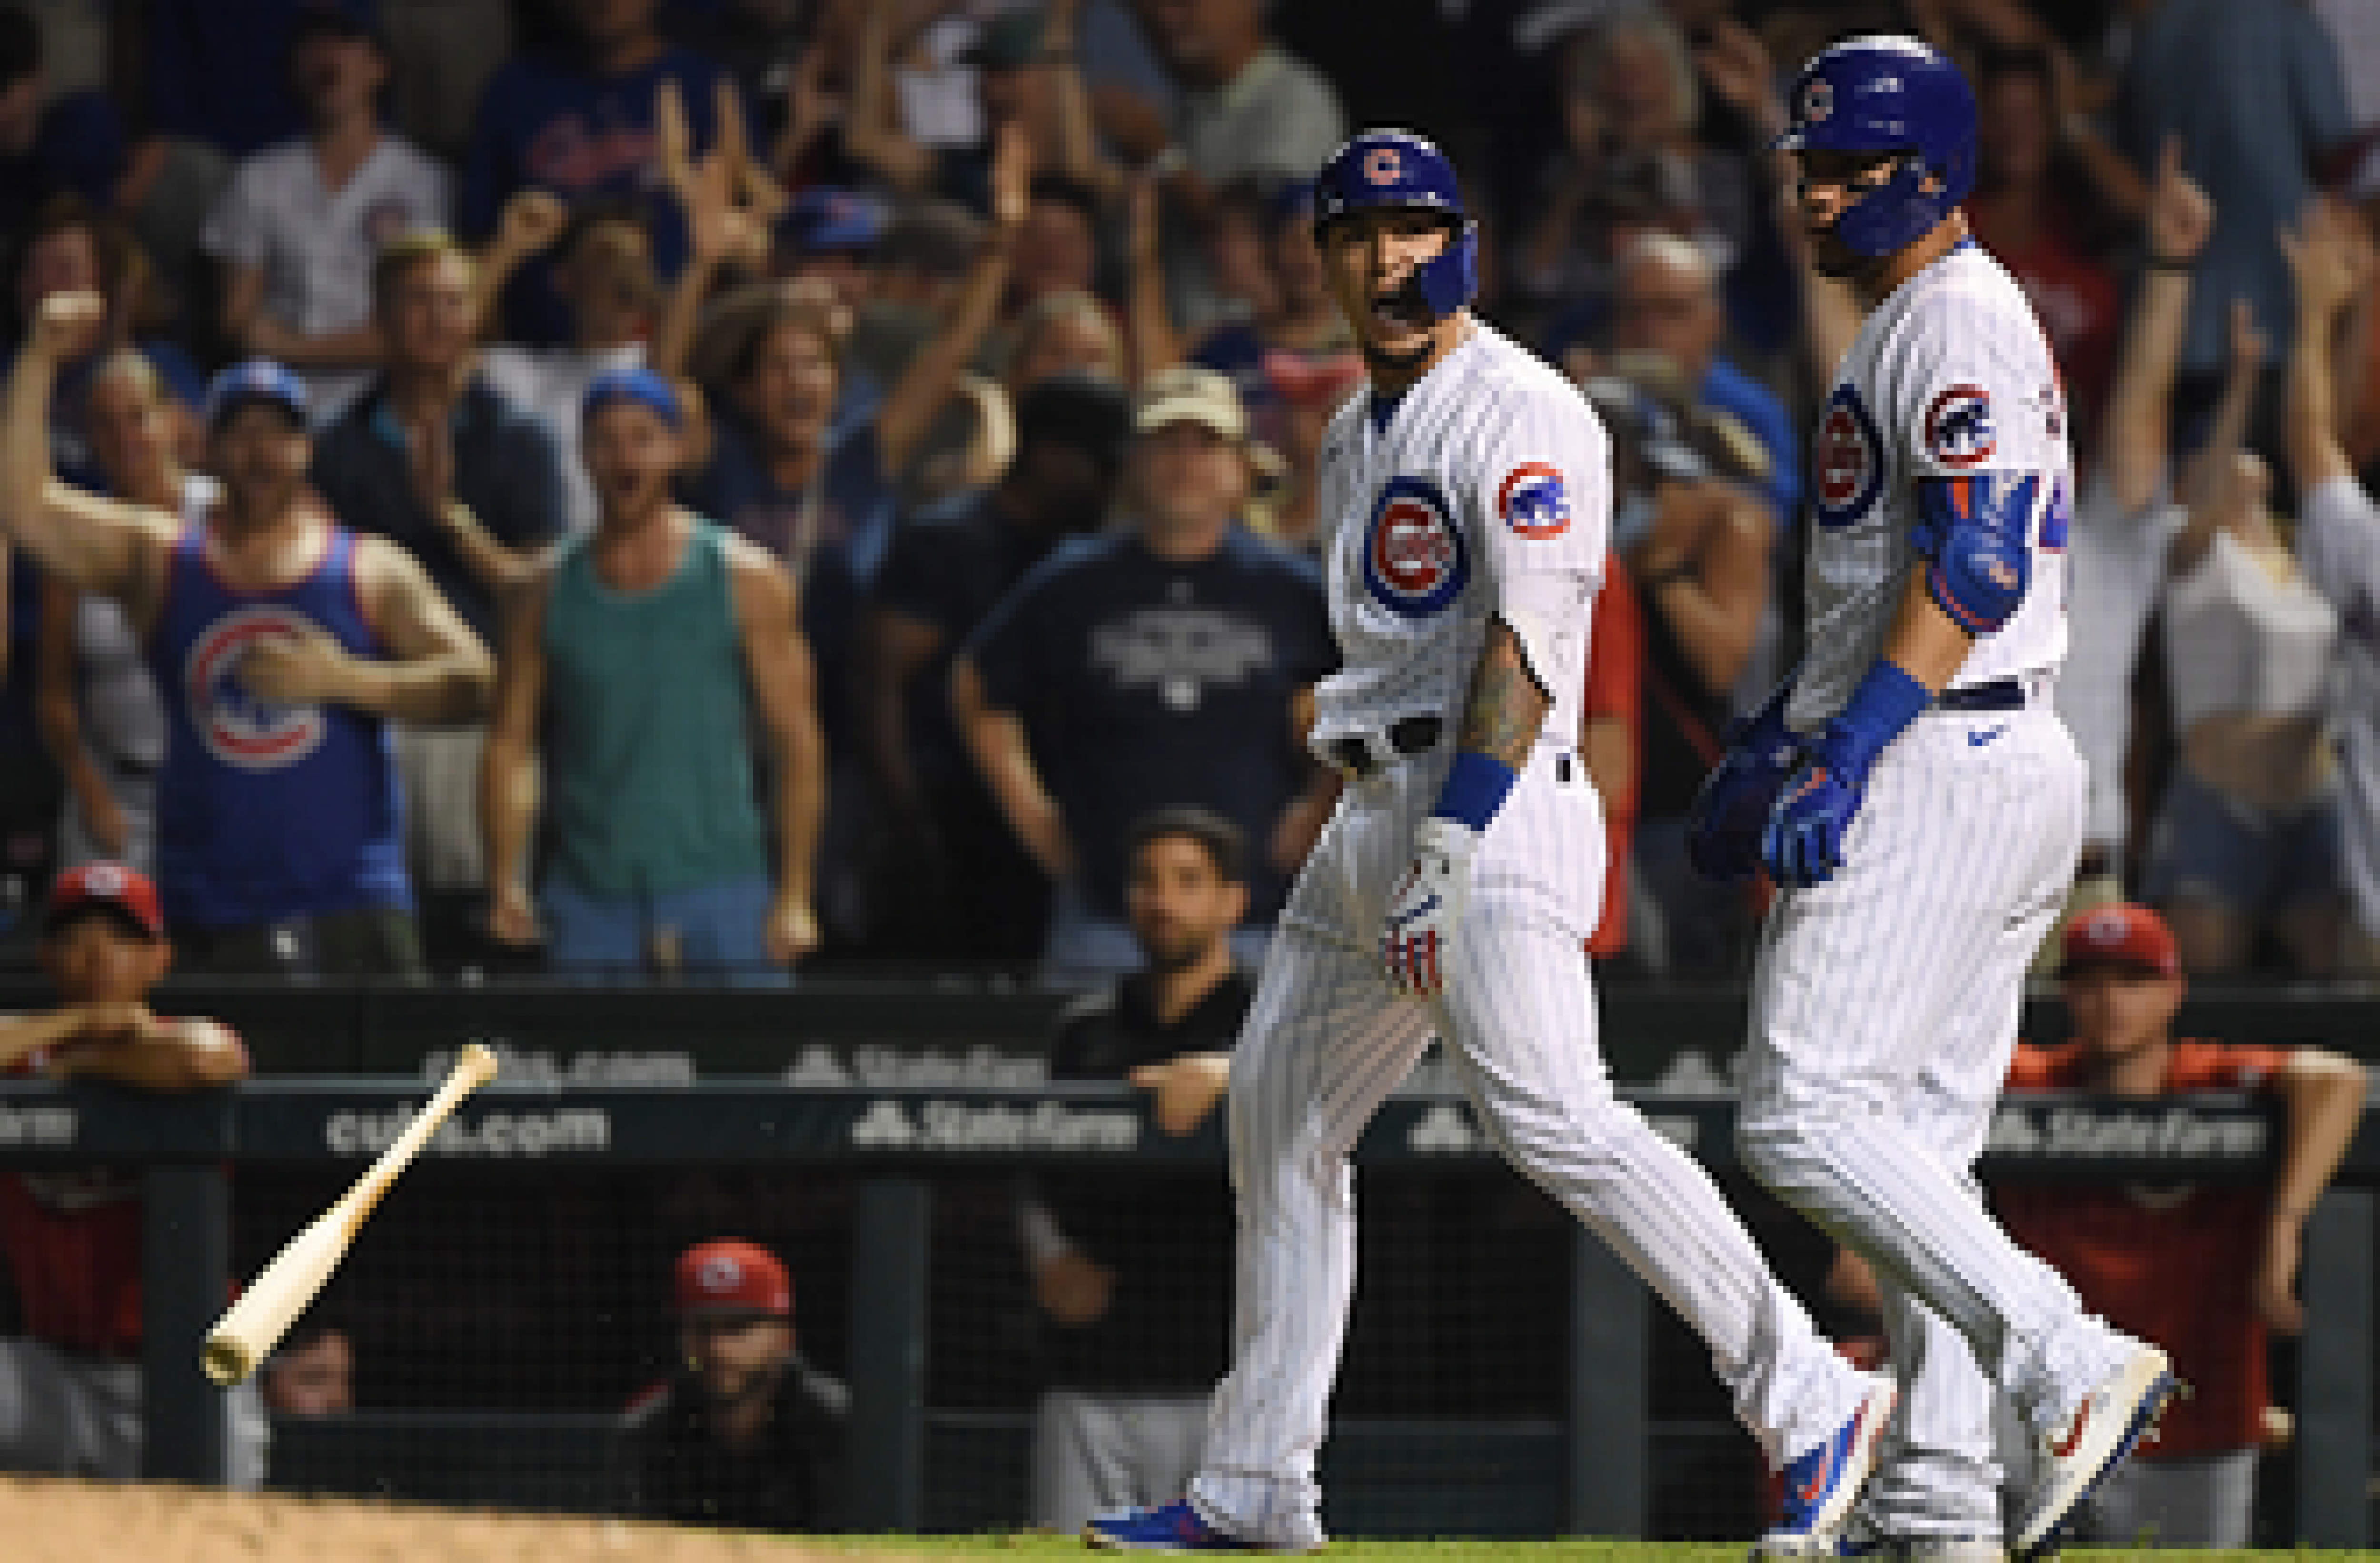 Anthony Rizzo goes 2-for-4 with a homer in Cubs’ 6-5 victory over Reds